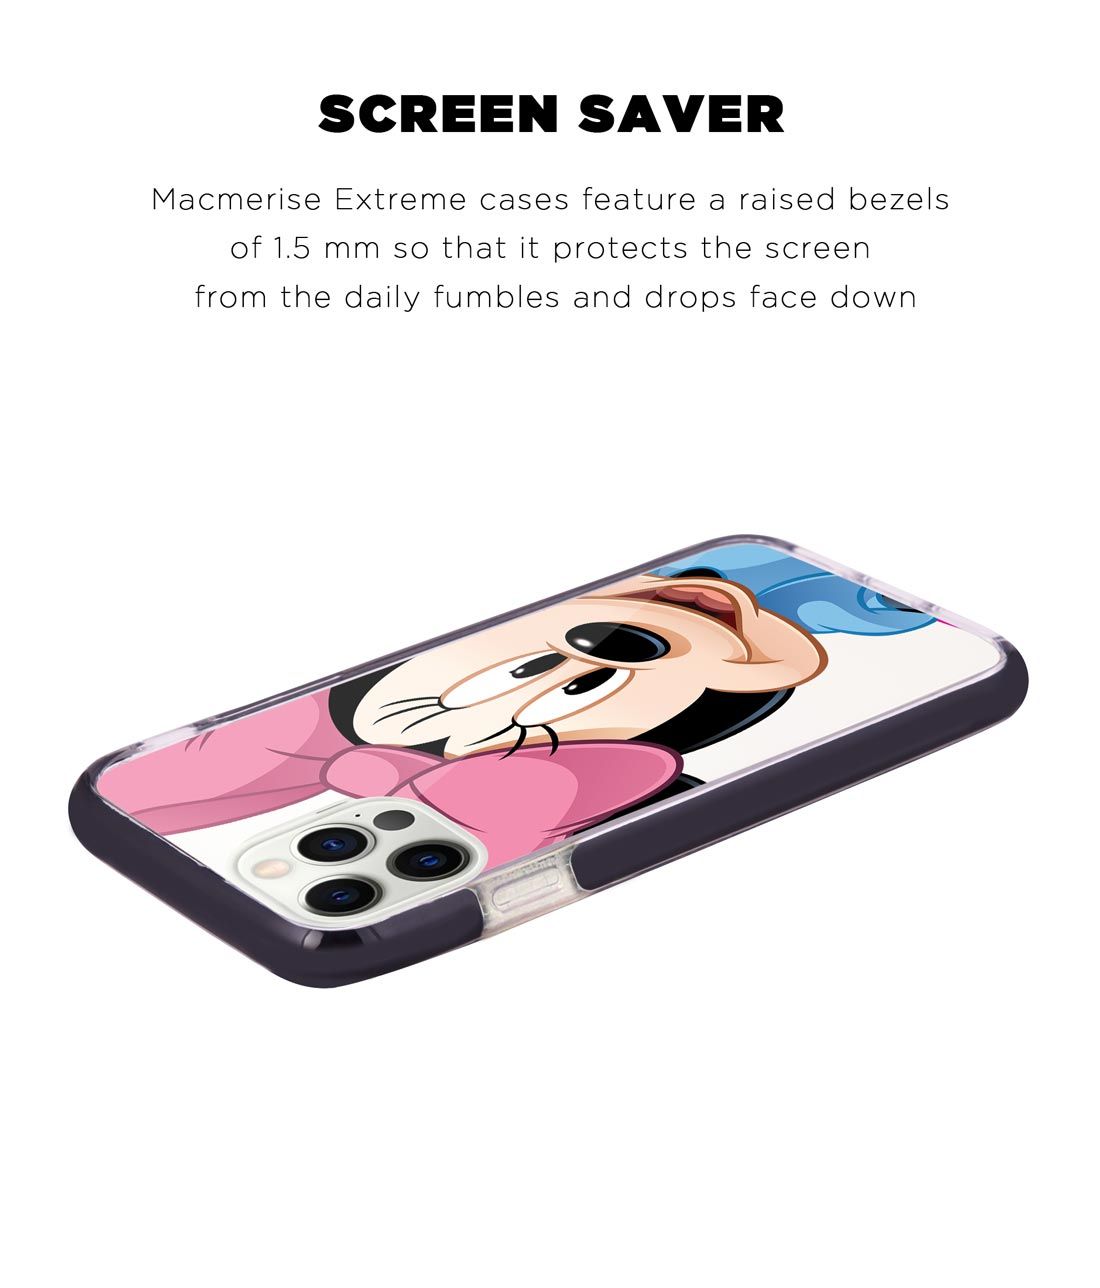 Zoom Up Minnie - Extreme Case for iPhone 12 Pro Max